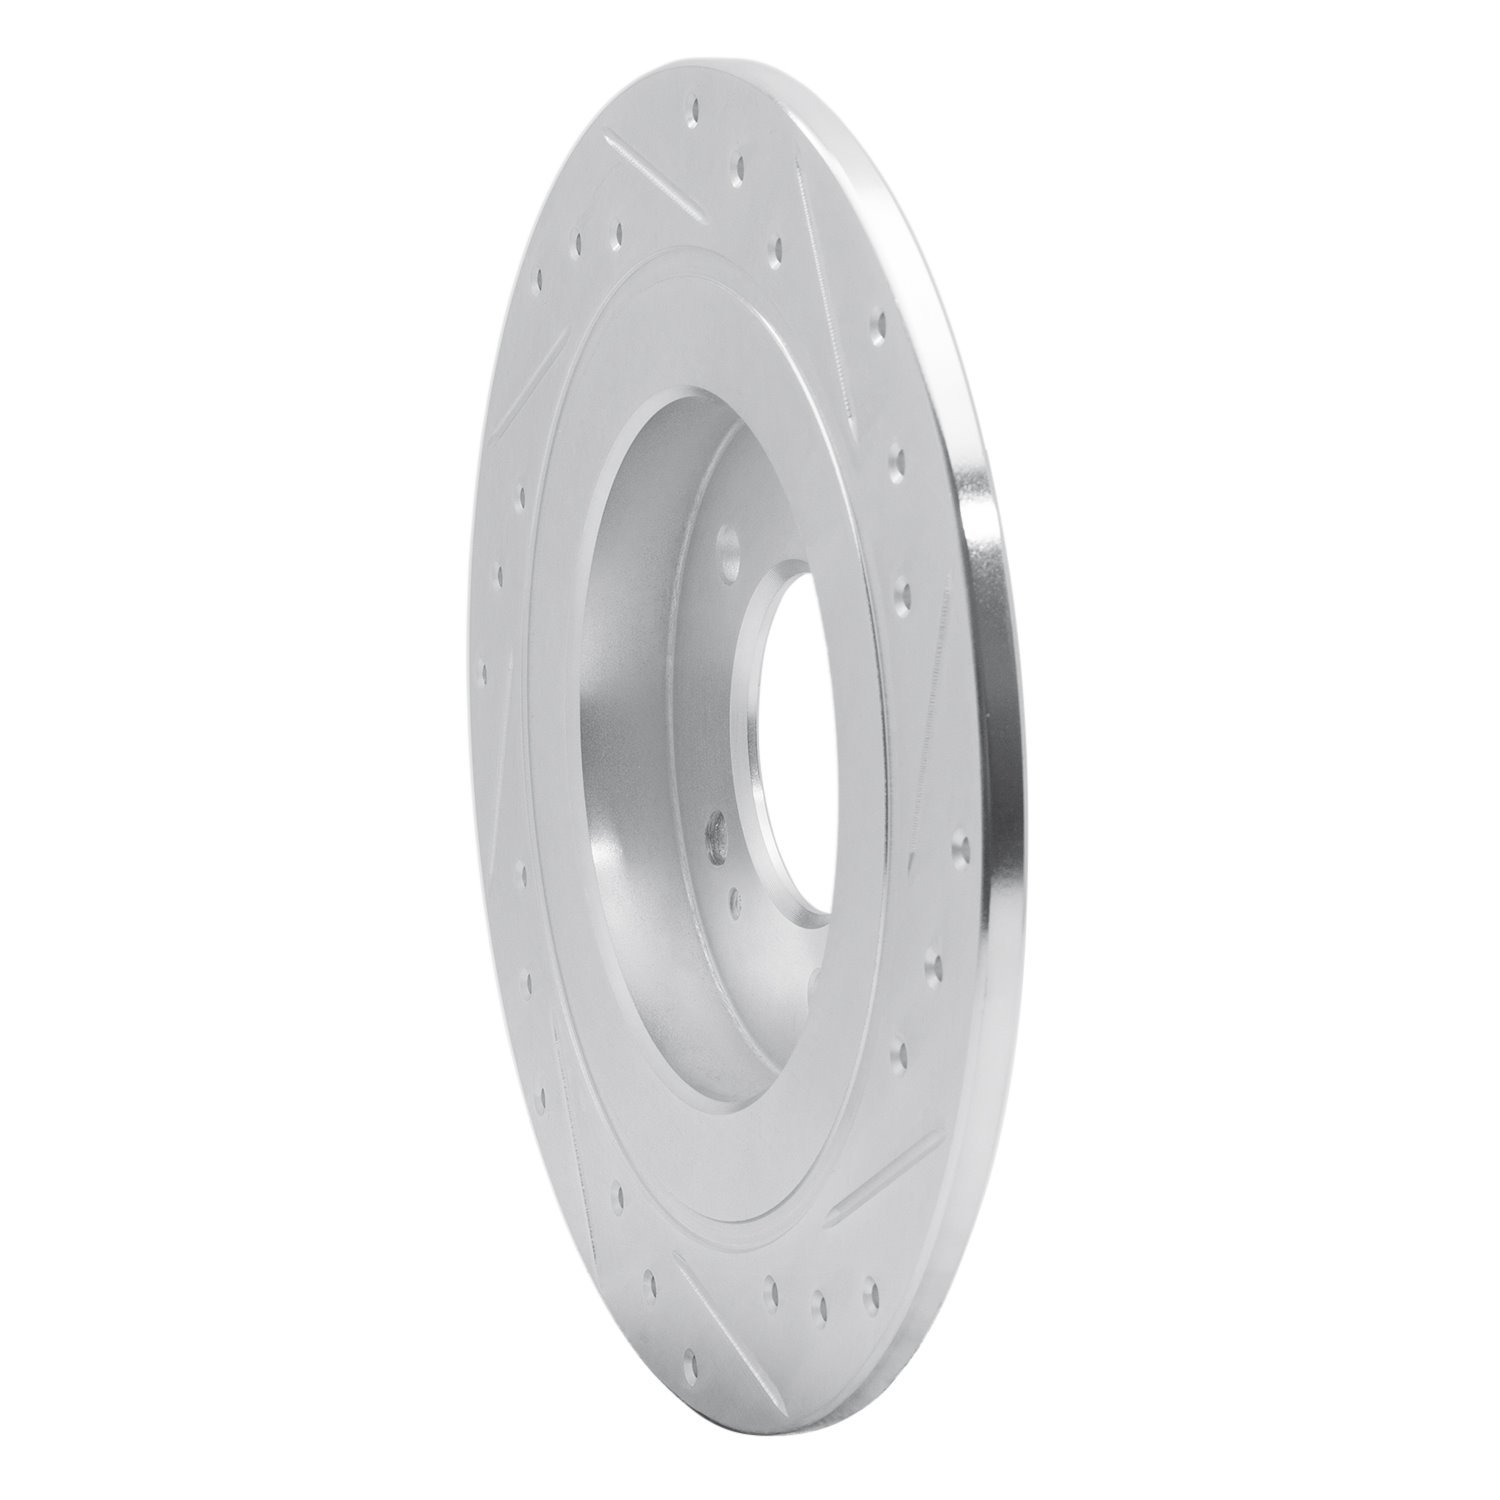 E-Line Drilled & Slotted Silver Brake Rotor, Fits Select Kia/Hyundai/Genesis, Position: Rear Left